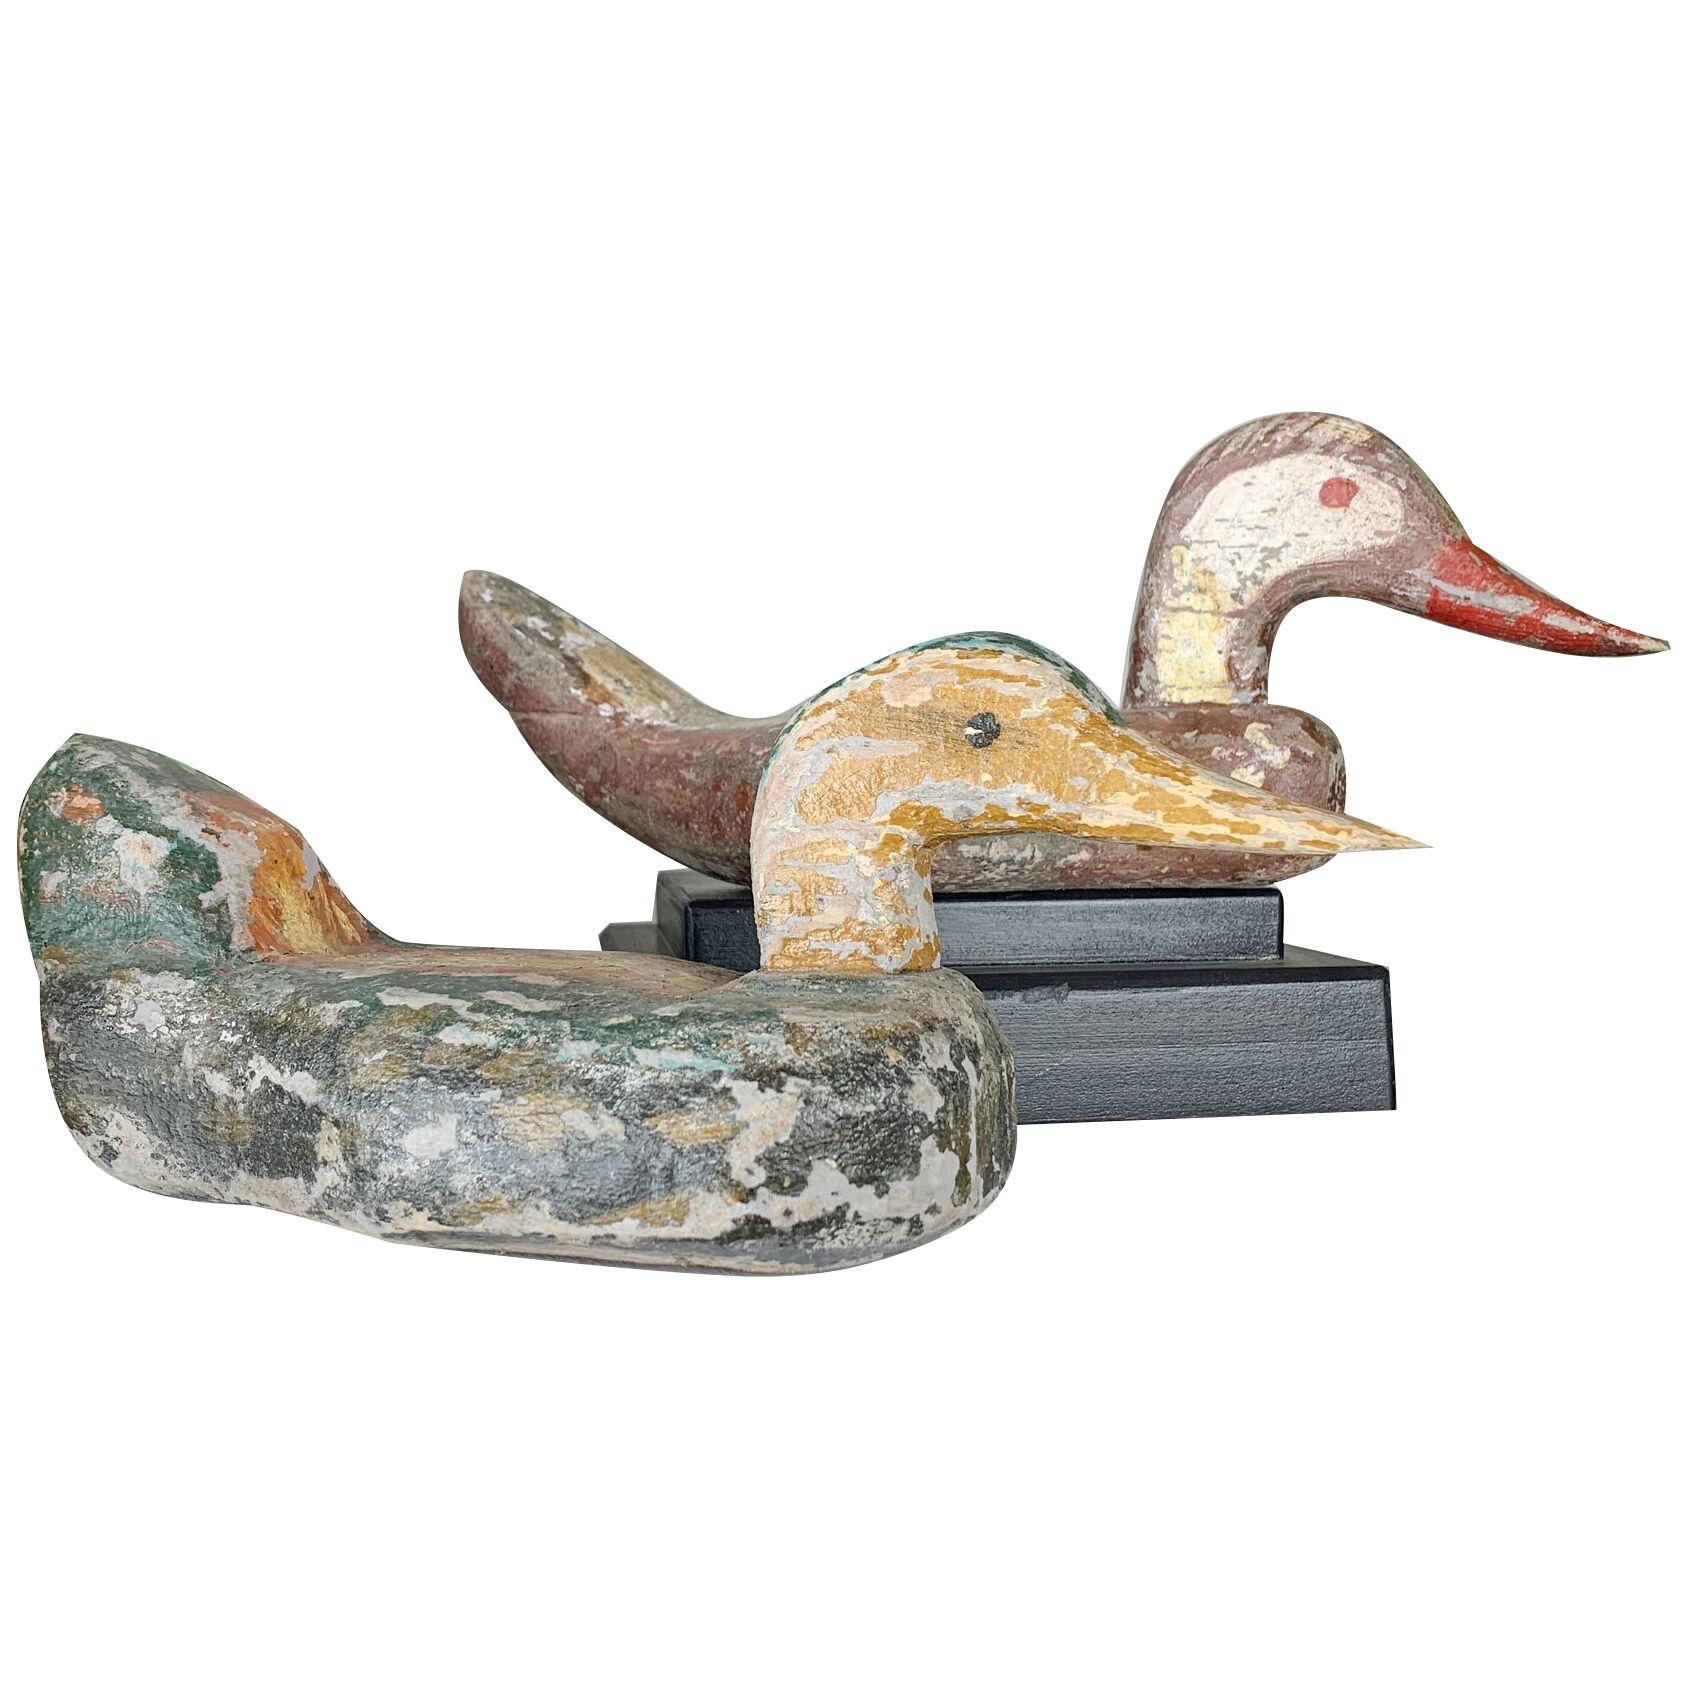 19th Century German Hand Carved and Painted Decoy Ducks